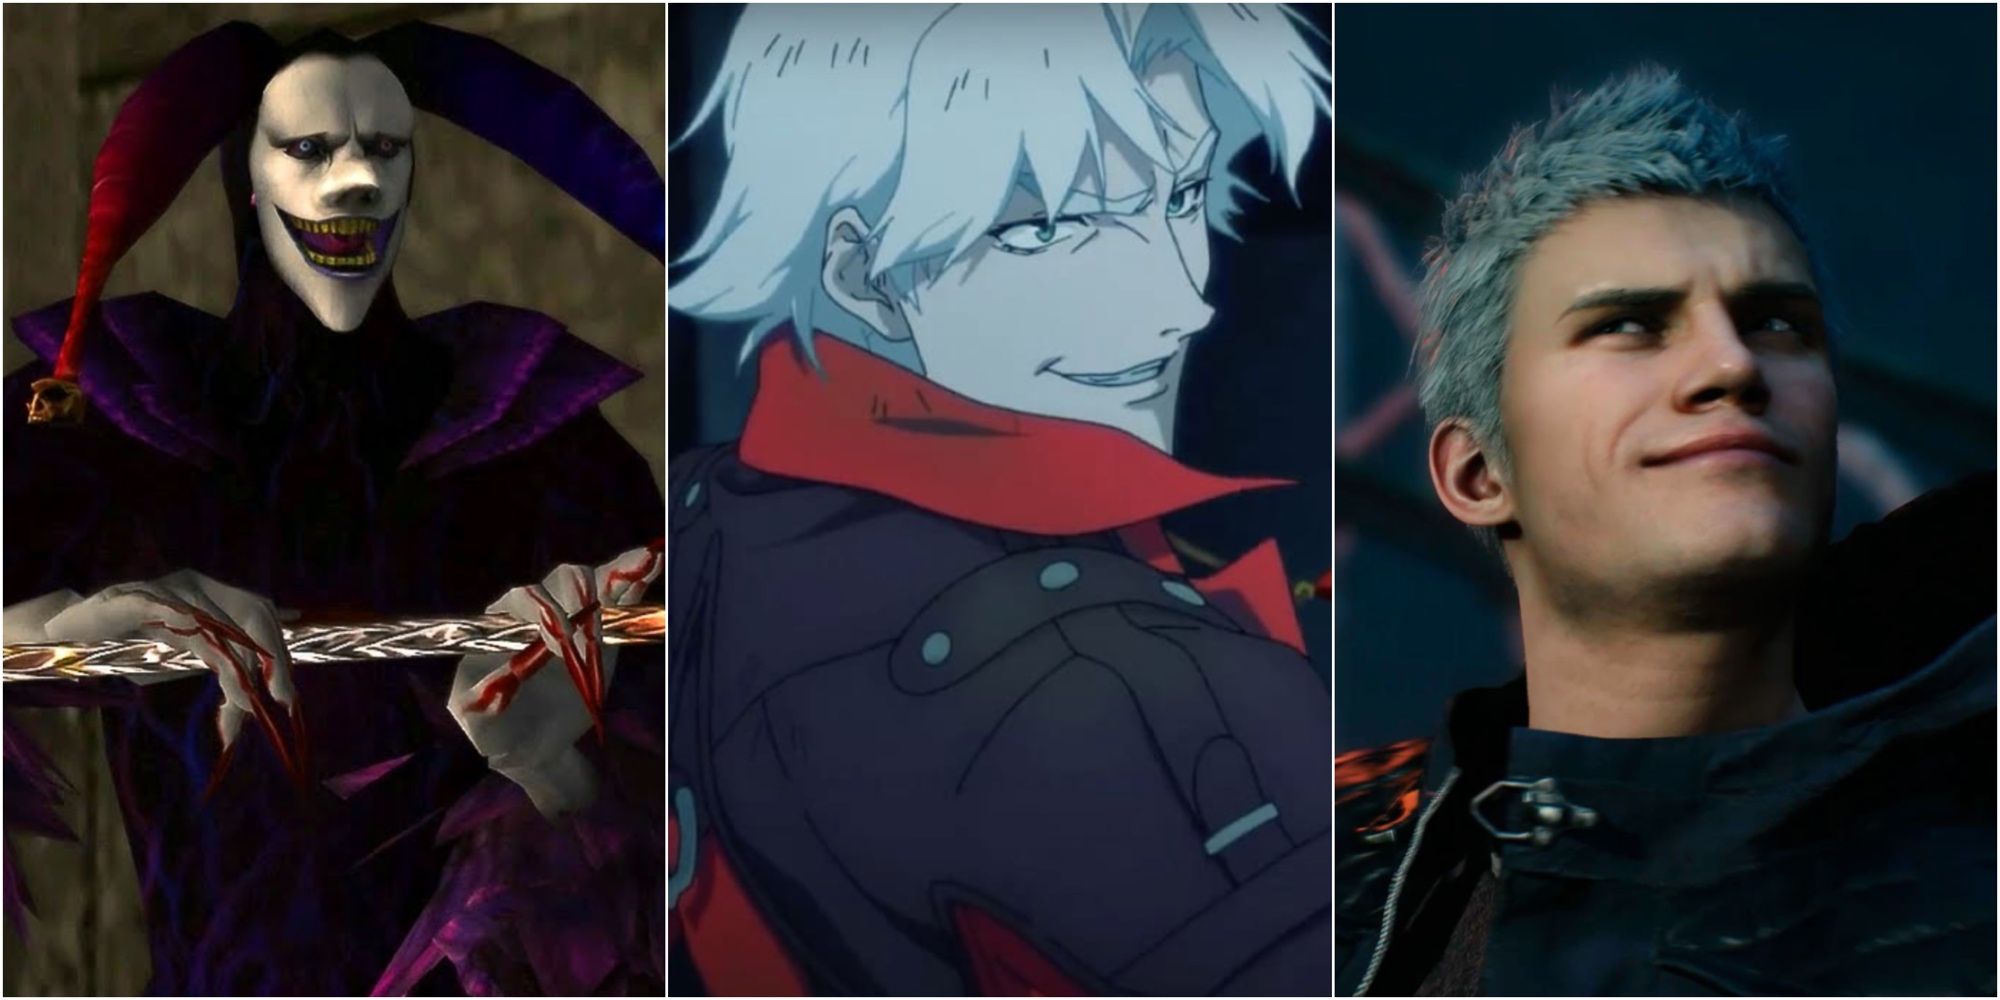 Arkham, Dante, and Nero in Devil May Cry